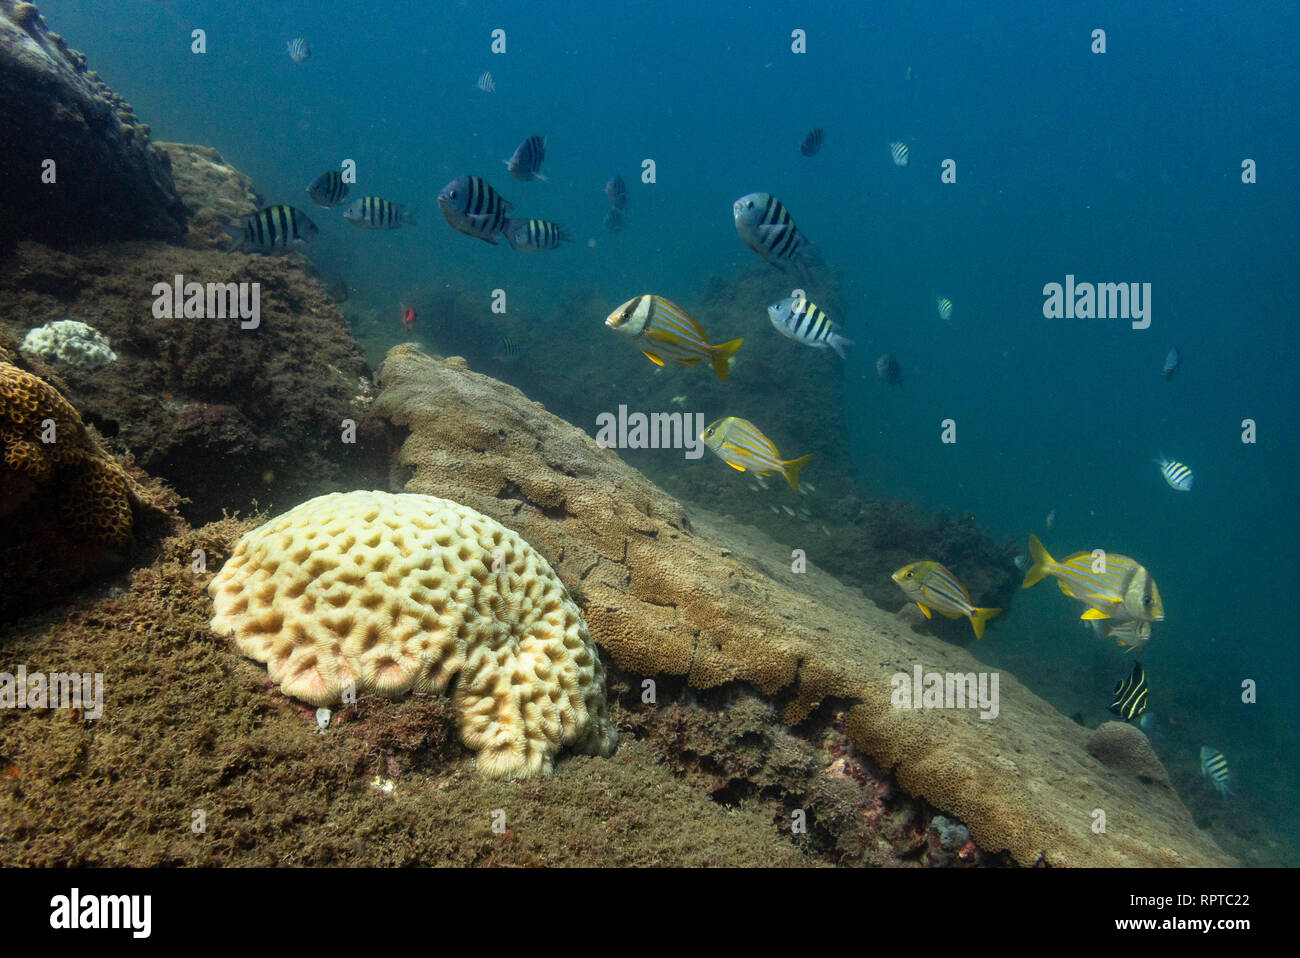 A Brain Coral and varied fish in Ilhabela, SE Brazil Stock Photo